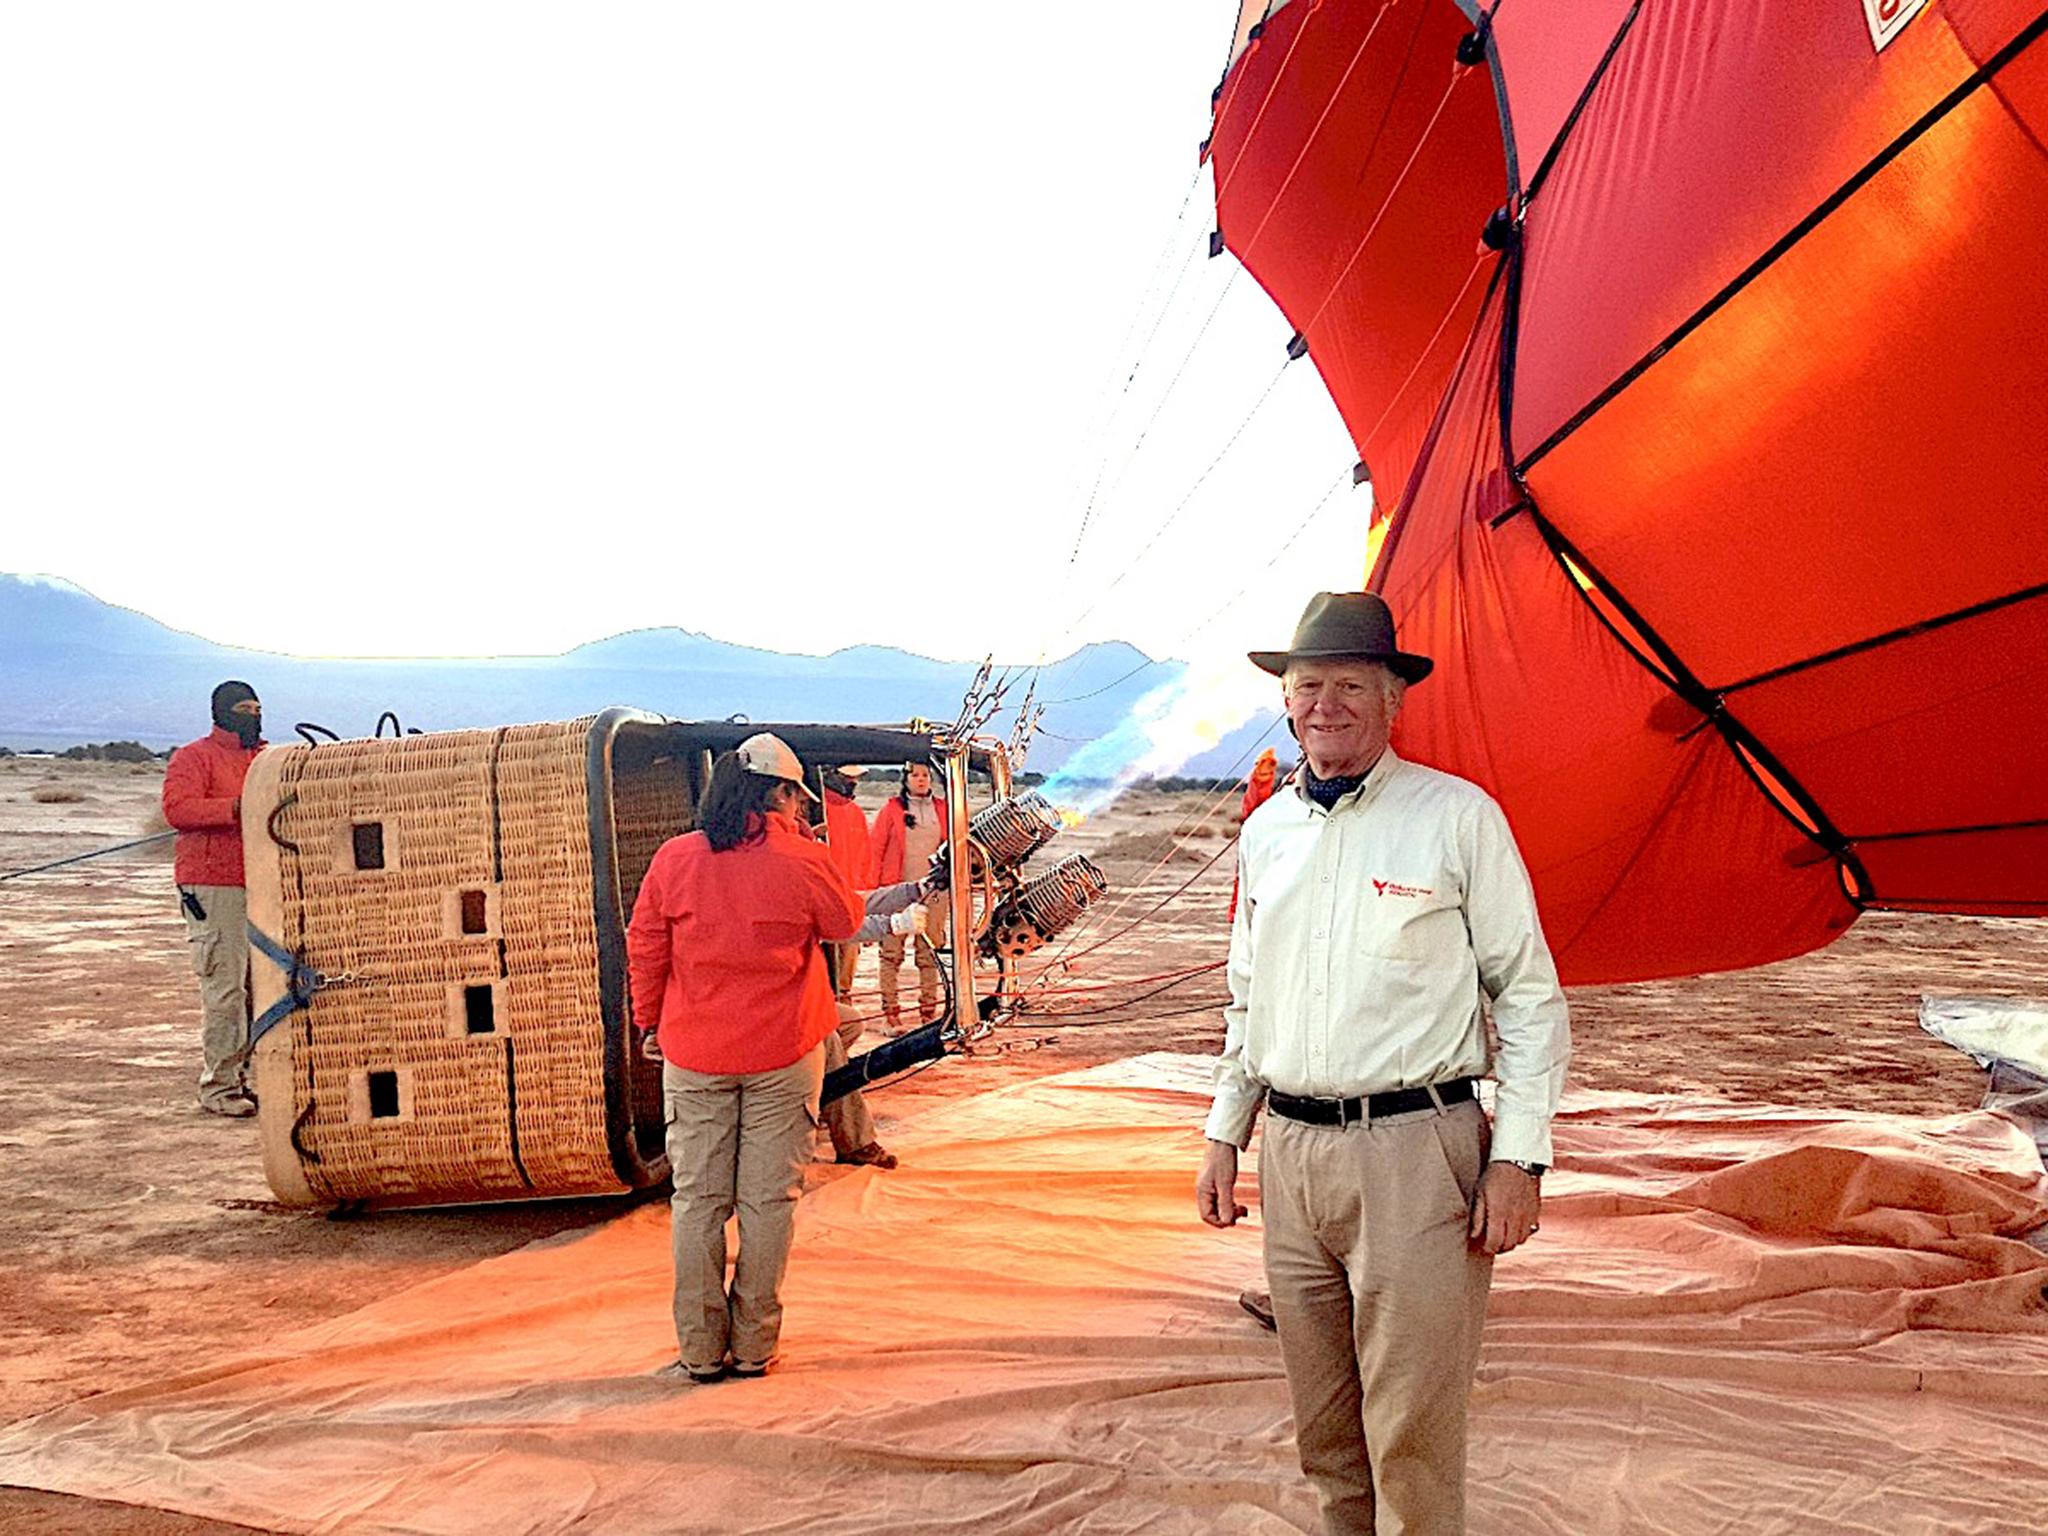 Cary Crawley has been flying hot air balloons since he was 27-years-old